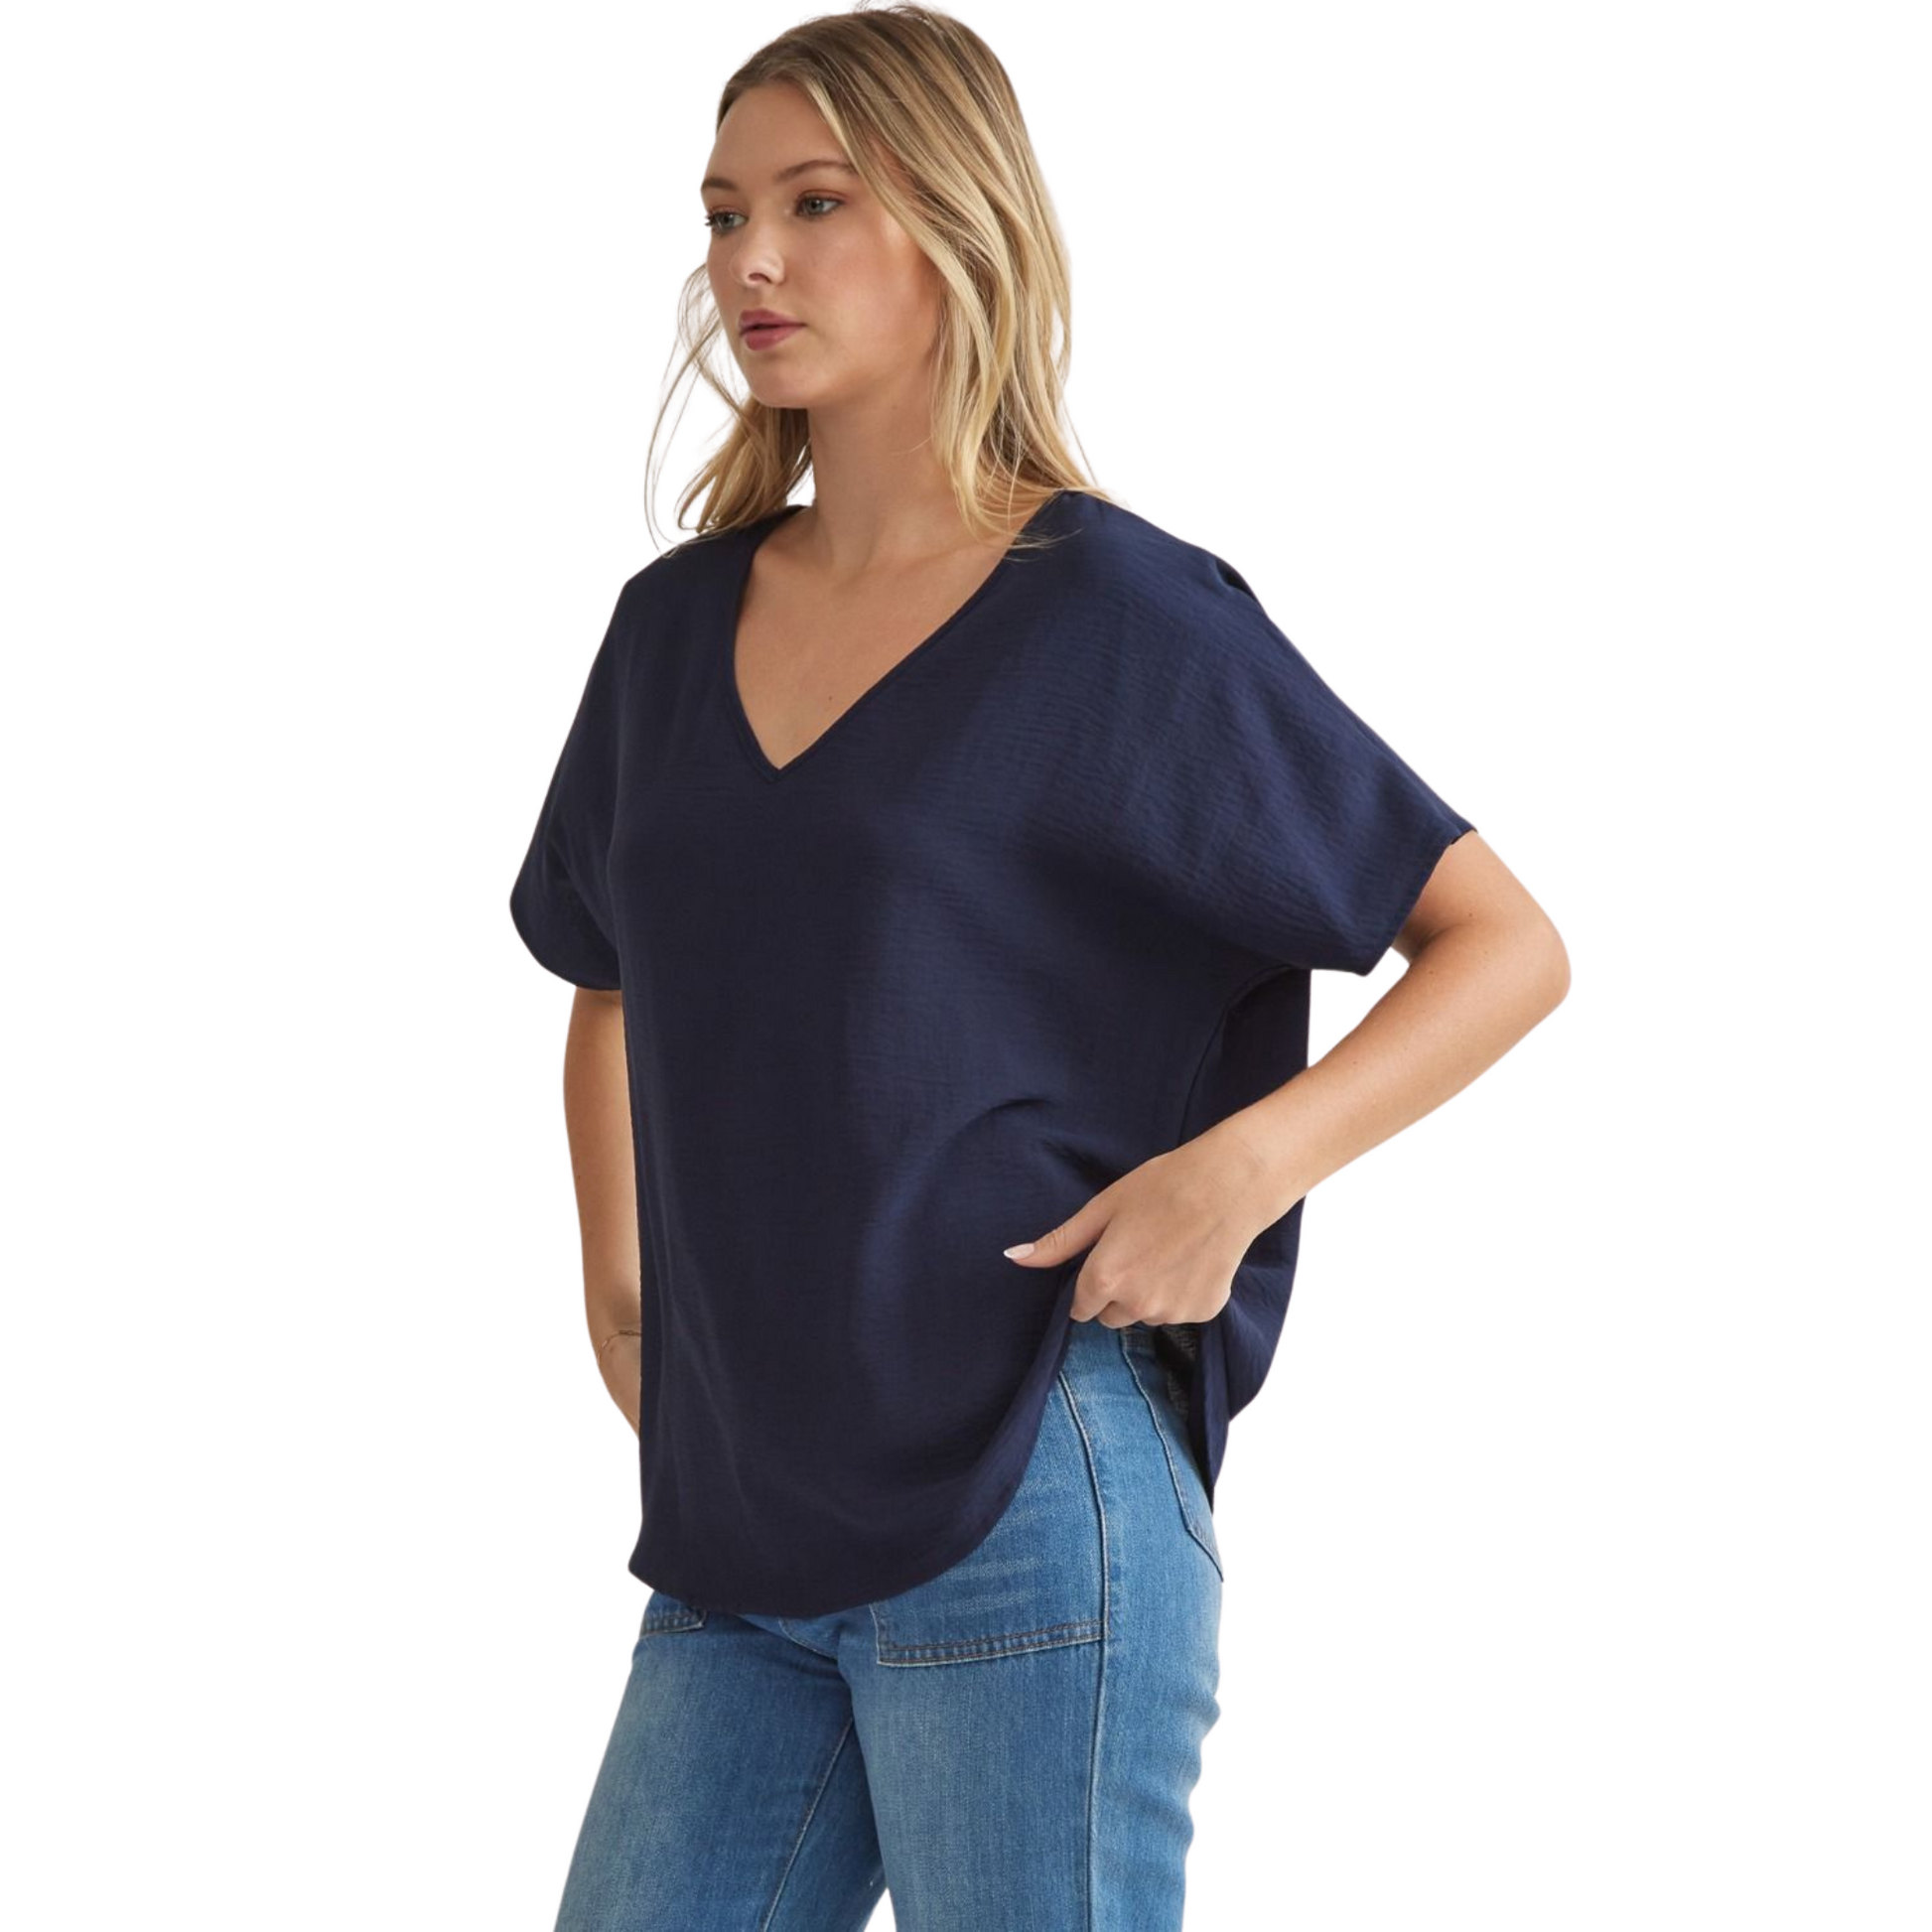 This navy solid v-neck top features an asymmetric rounded hem detail that adds a unique touch to any outfit. Made with lightweight, semi-sheer woven fabric, this top is perfect for all-day wear. Look effortlessly stylish and feel comfortable at the same time.